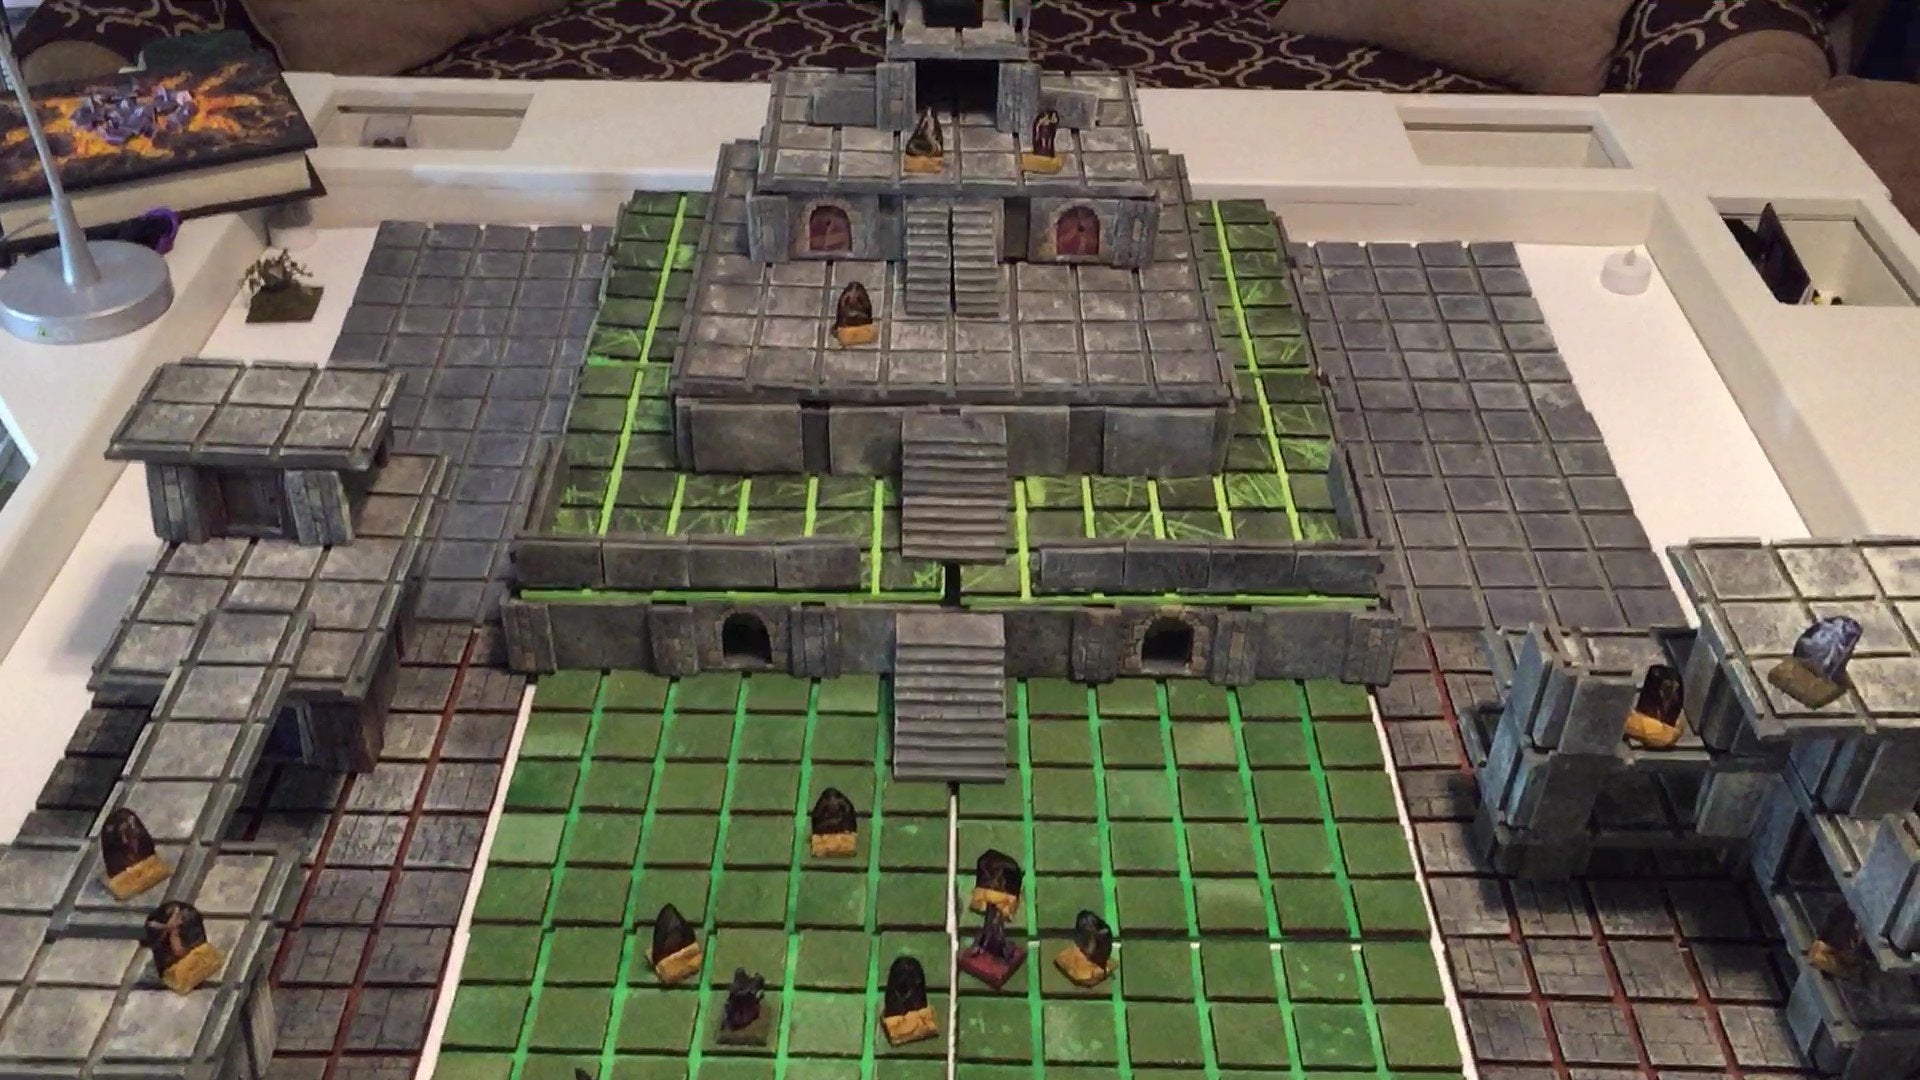 Build temple ruins with the TERRAINO dungeon basics tabletop terrain pieces.